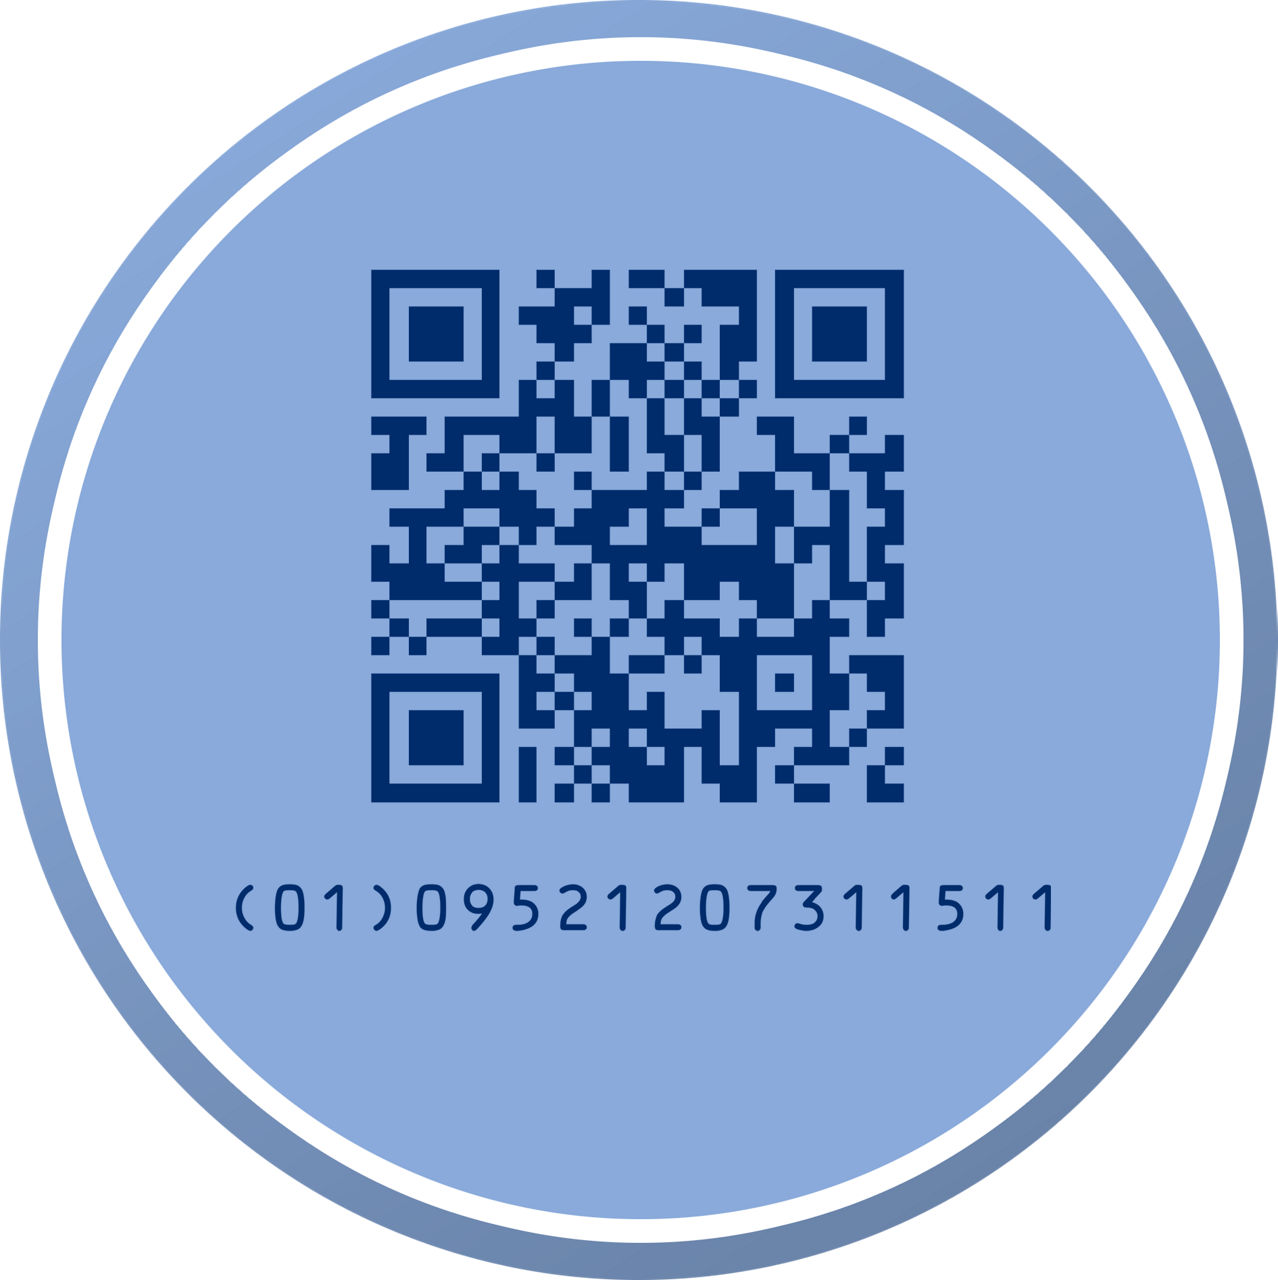 Picture of a QR Code with GS1 Digital Link